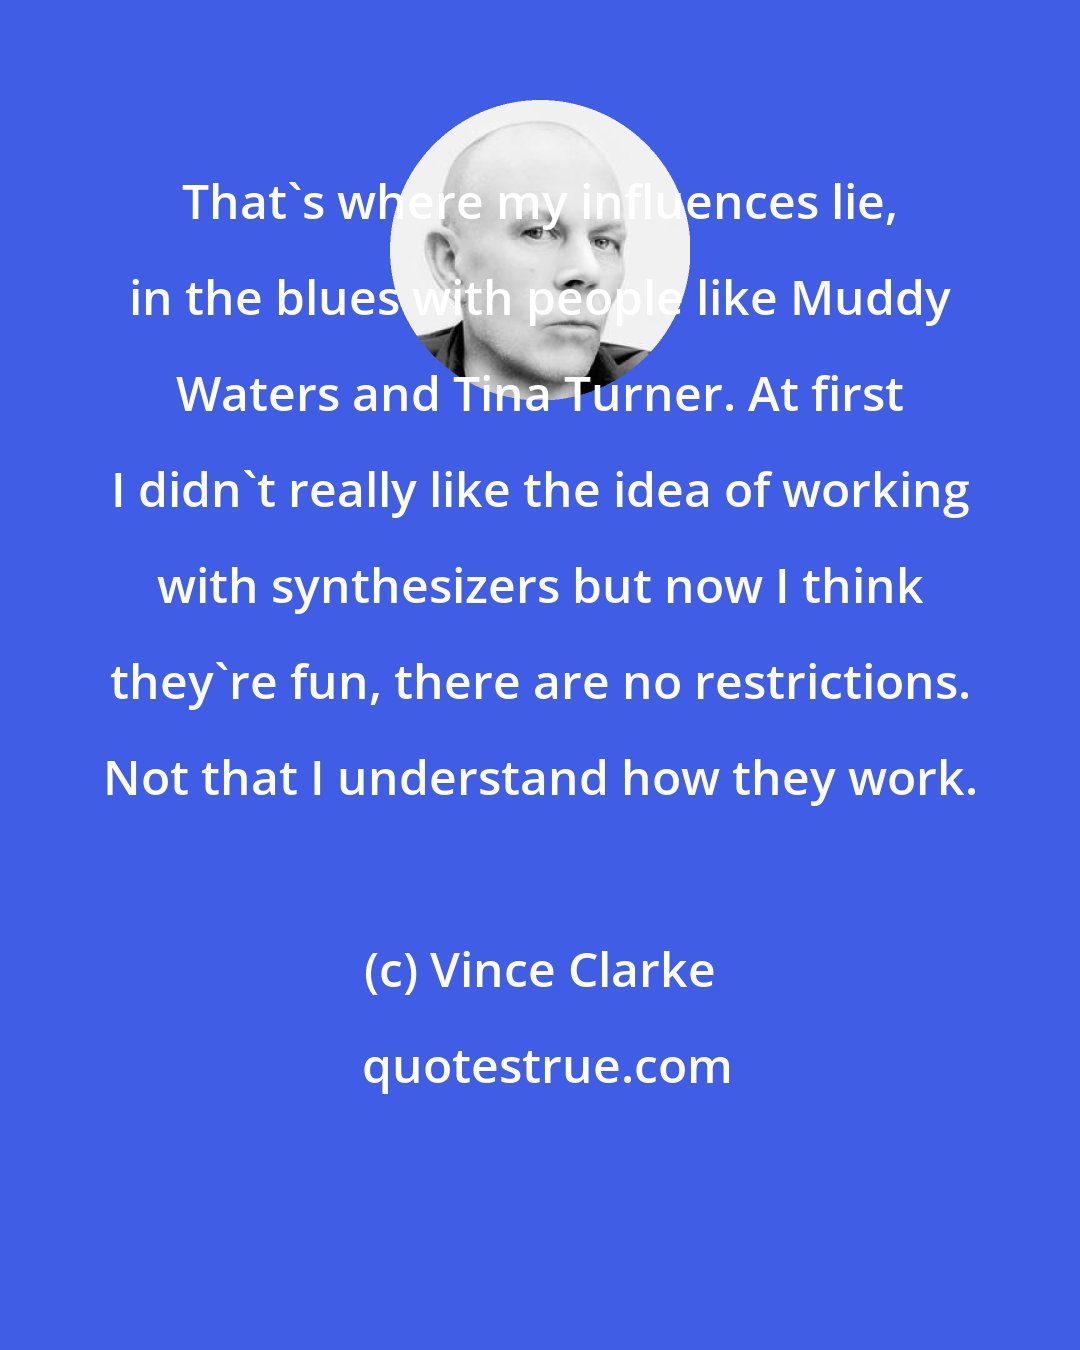 Vince Clarke: That's where my influences lie, in the blues with people like Muddy Waters and Tina Turner. At first I didn't really like the idea of working with synthesizers but now I think they're fun, there are no restrictions. Not that I understand how they work.